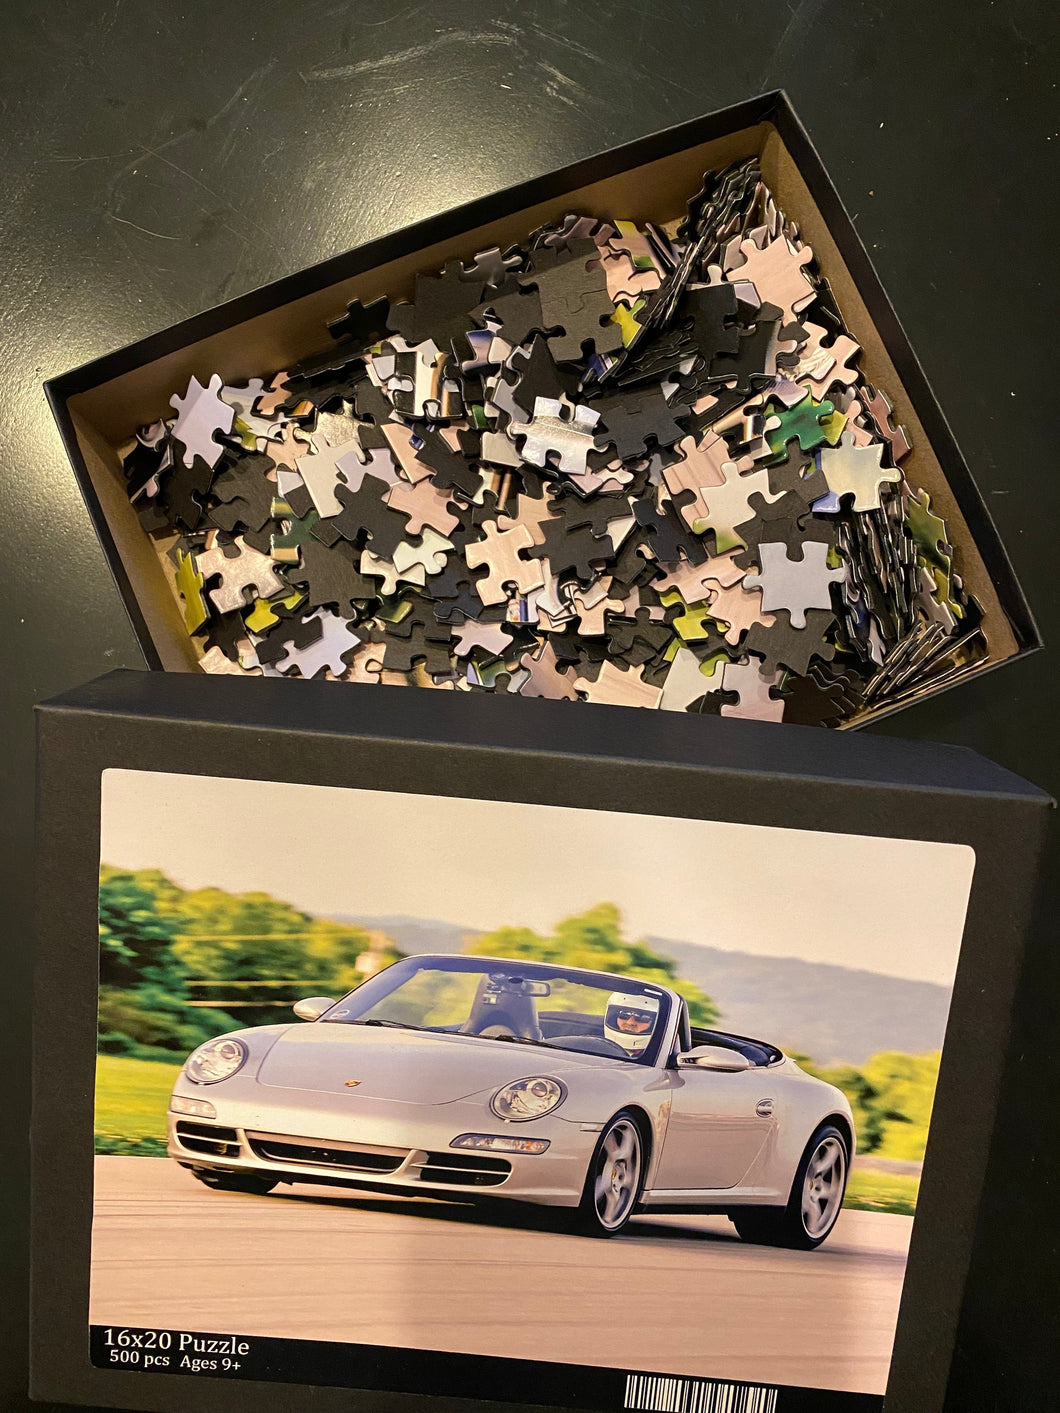 CUSTOM PUZZLE OF YOUR OWN IMAGE